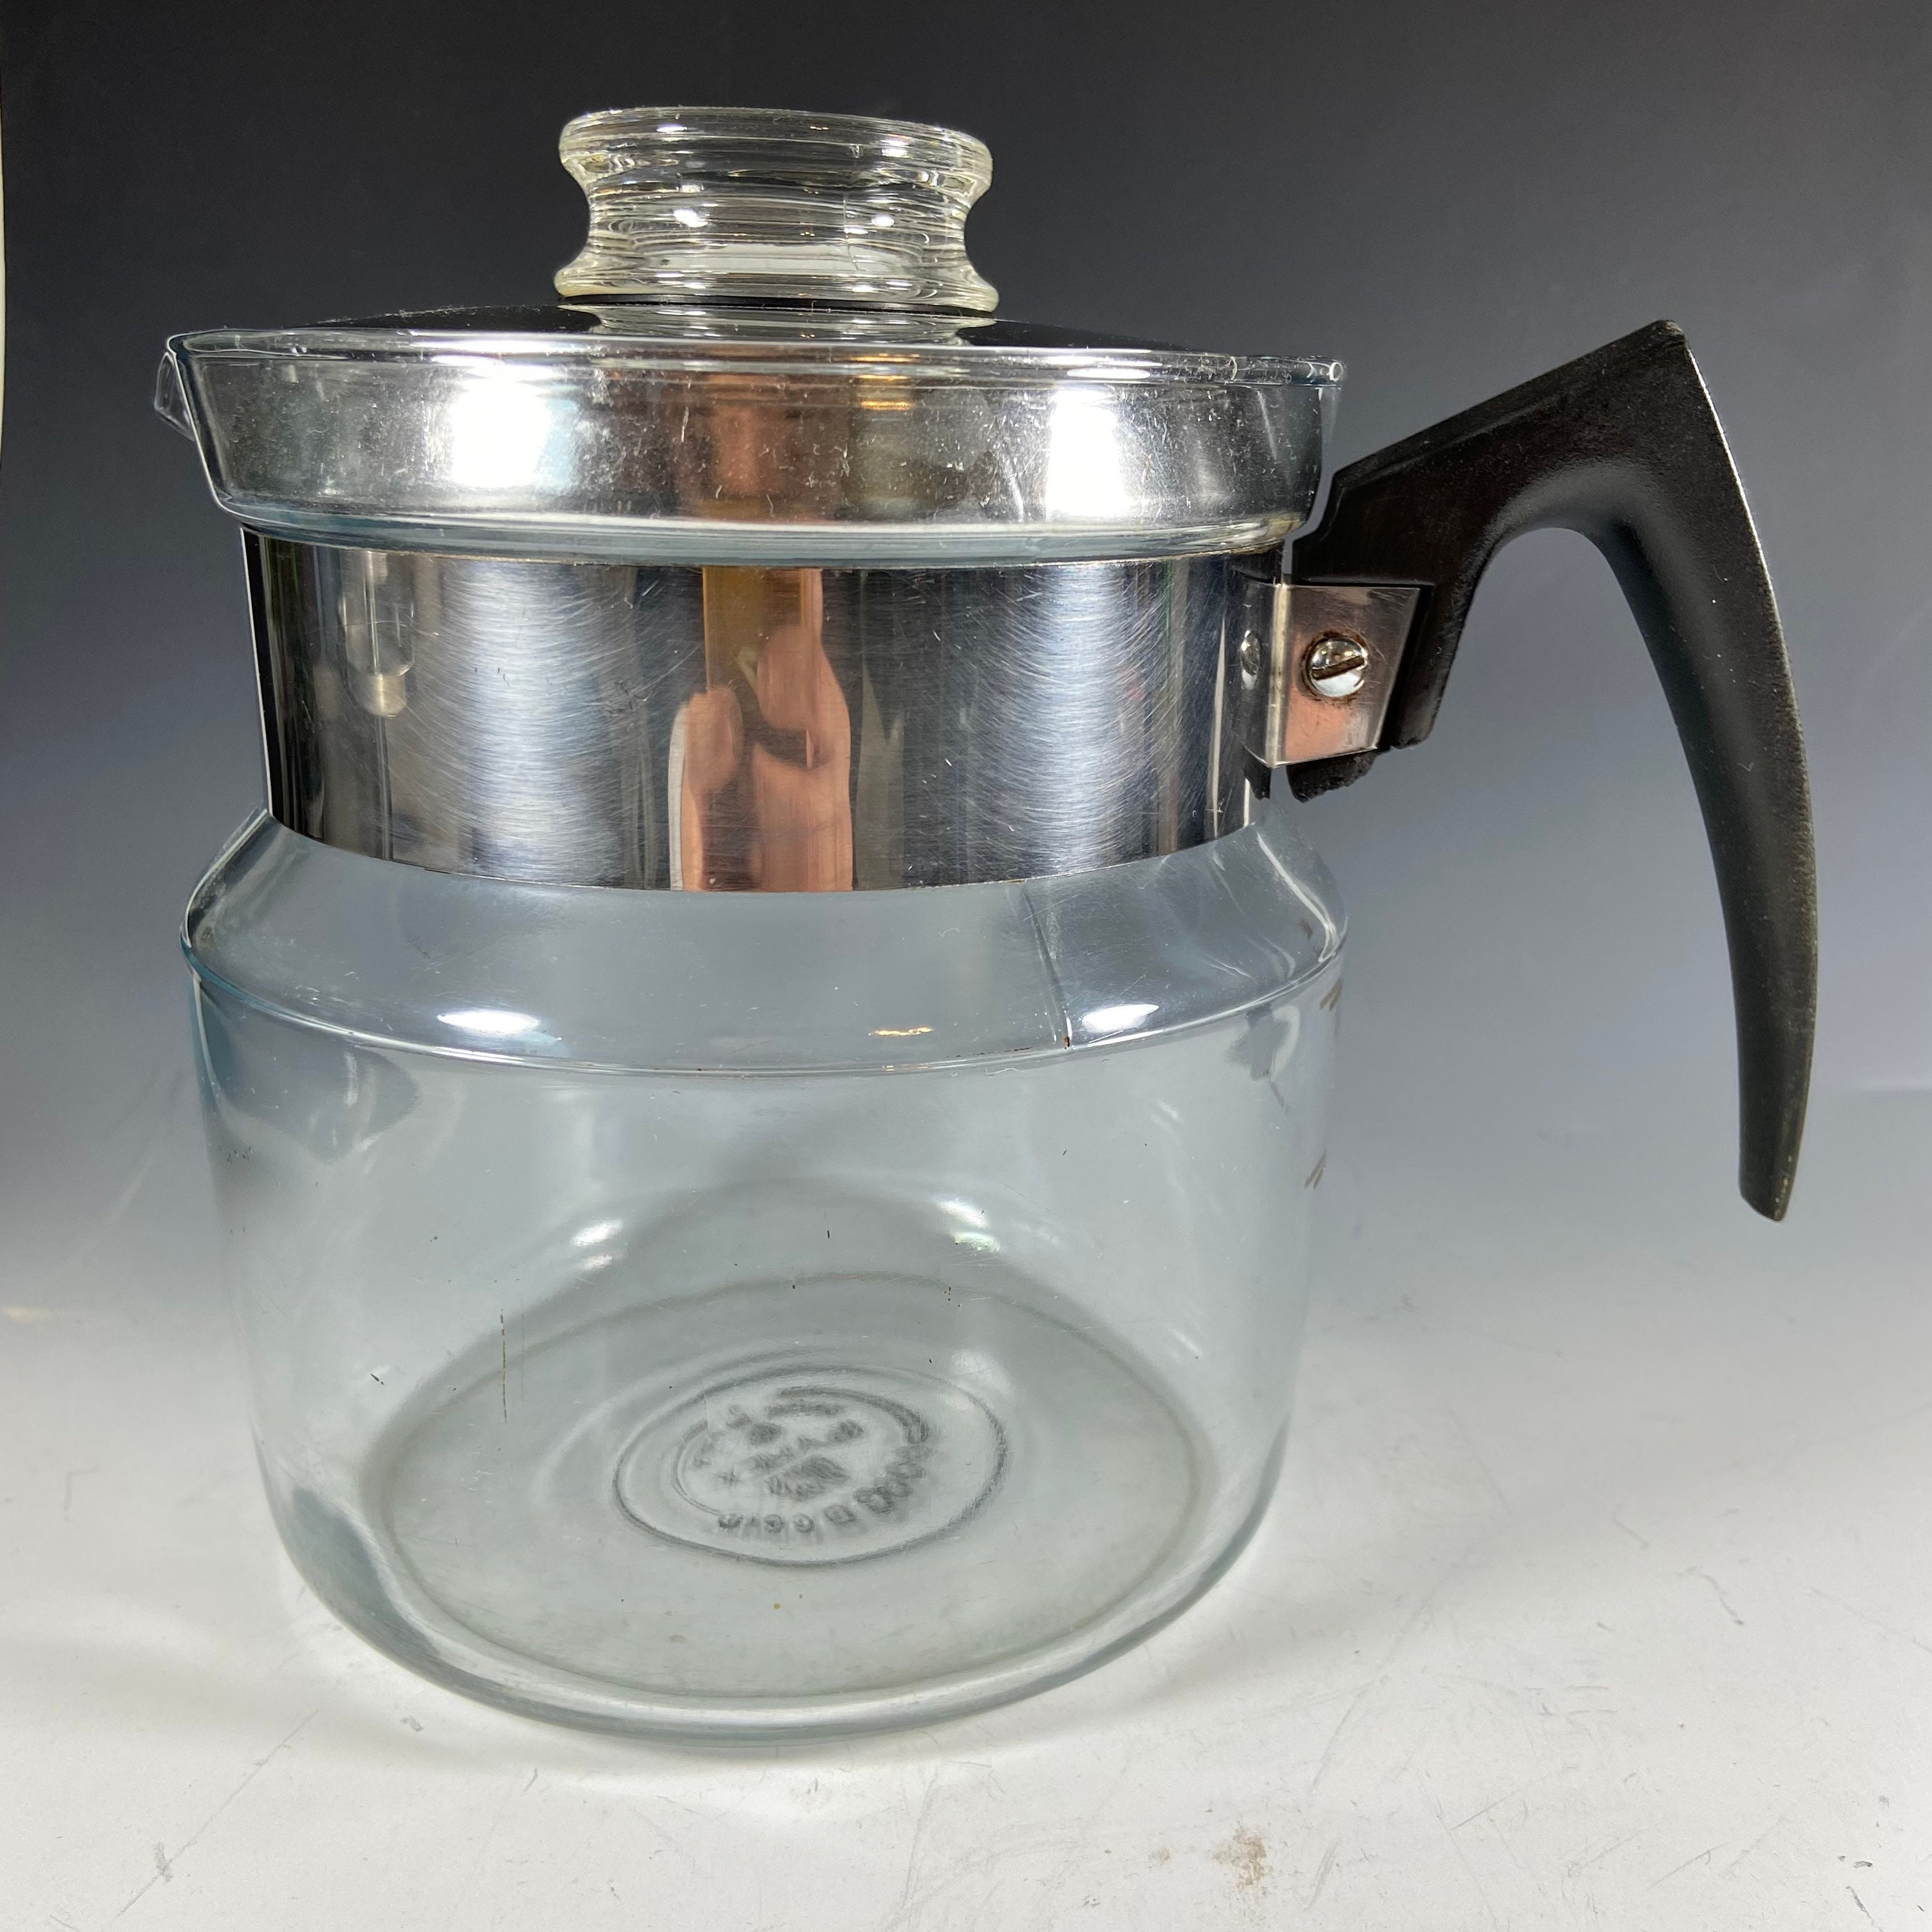 Vintage Pyrex flamewear 9 cup percolator - Lil Dusty Online Auctions - All  Estate Services, LLC